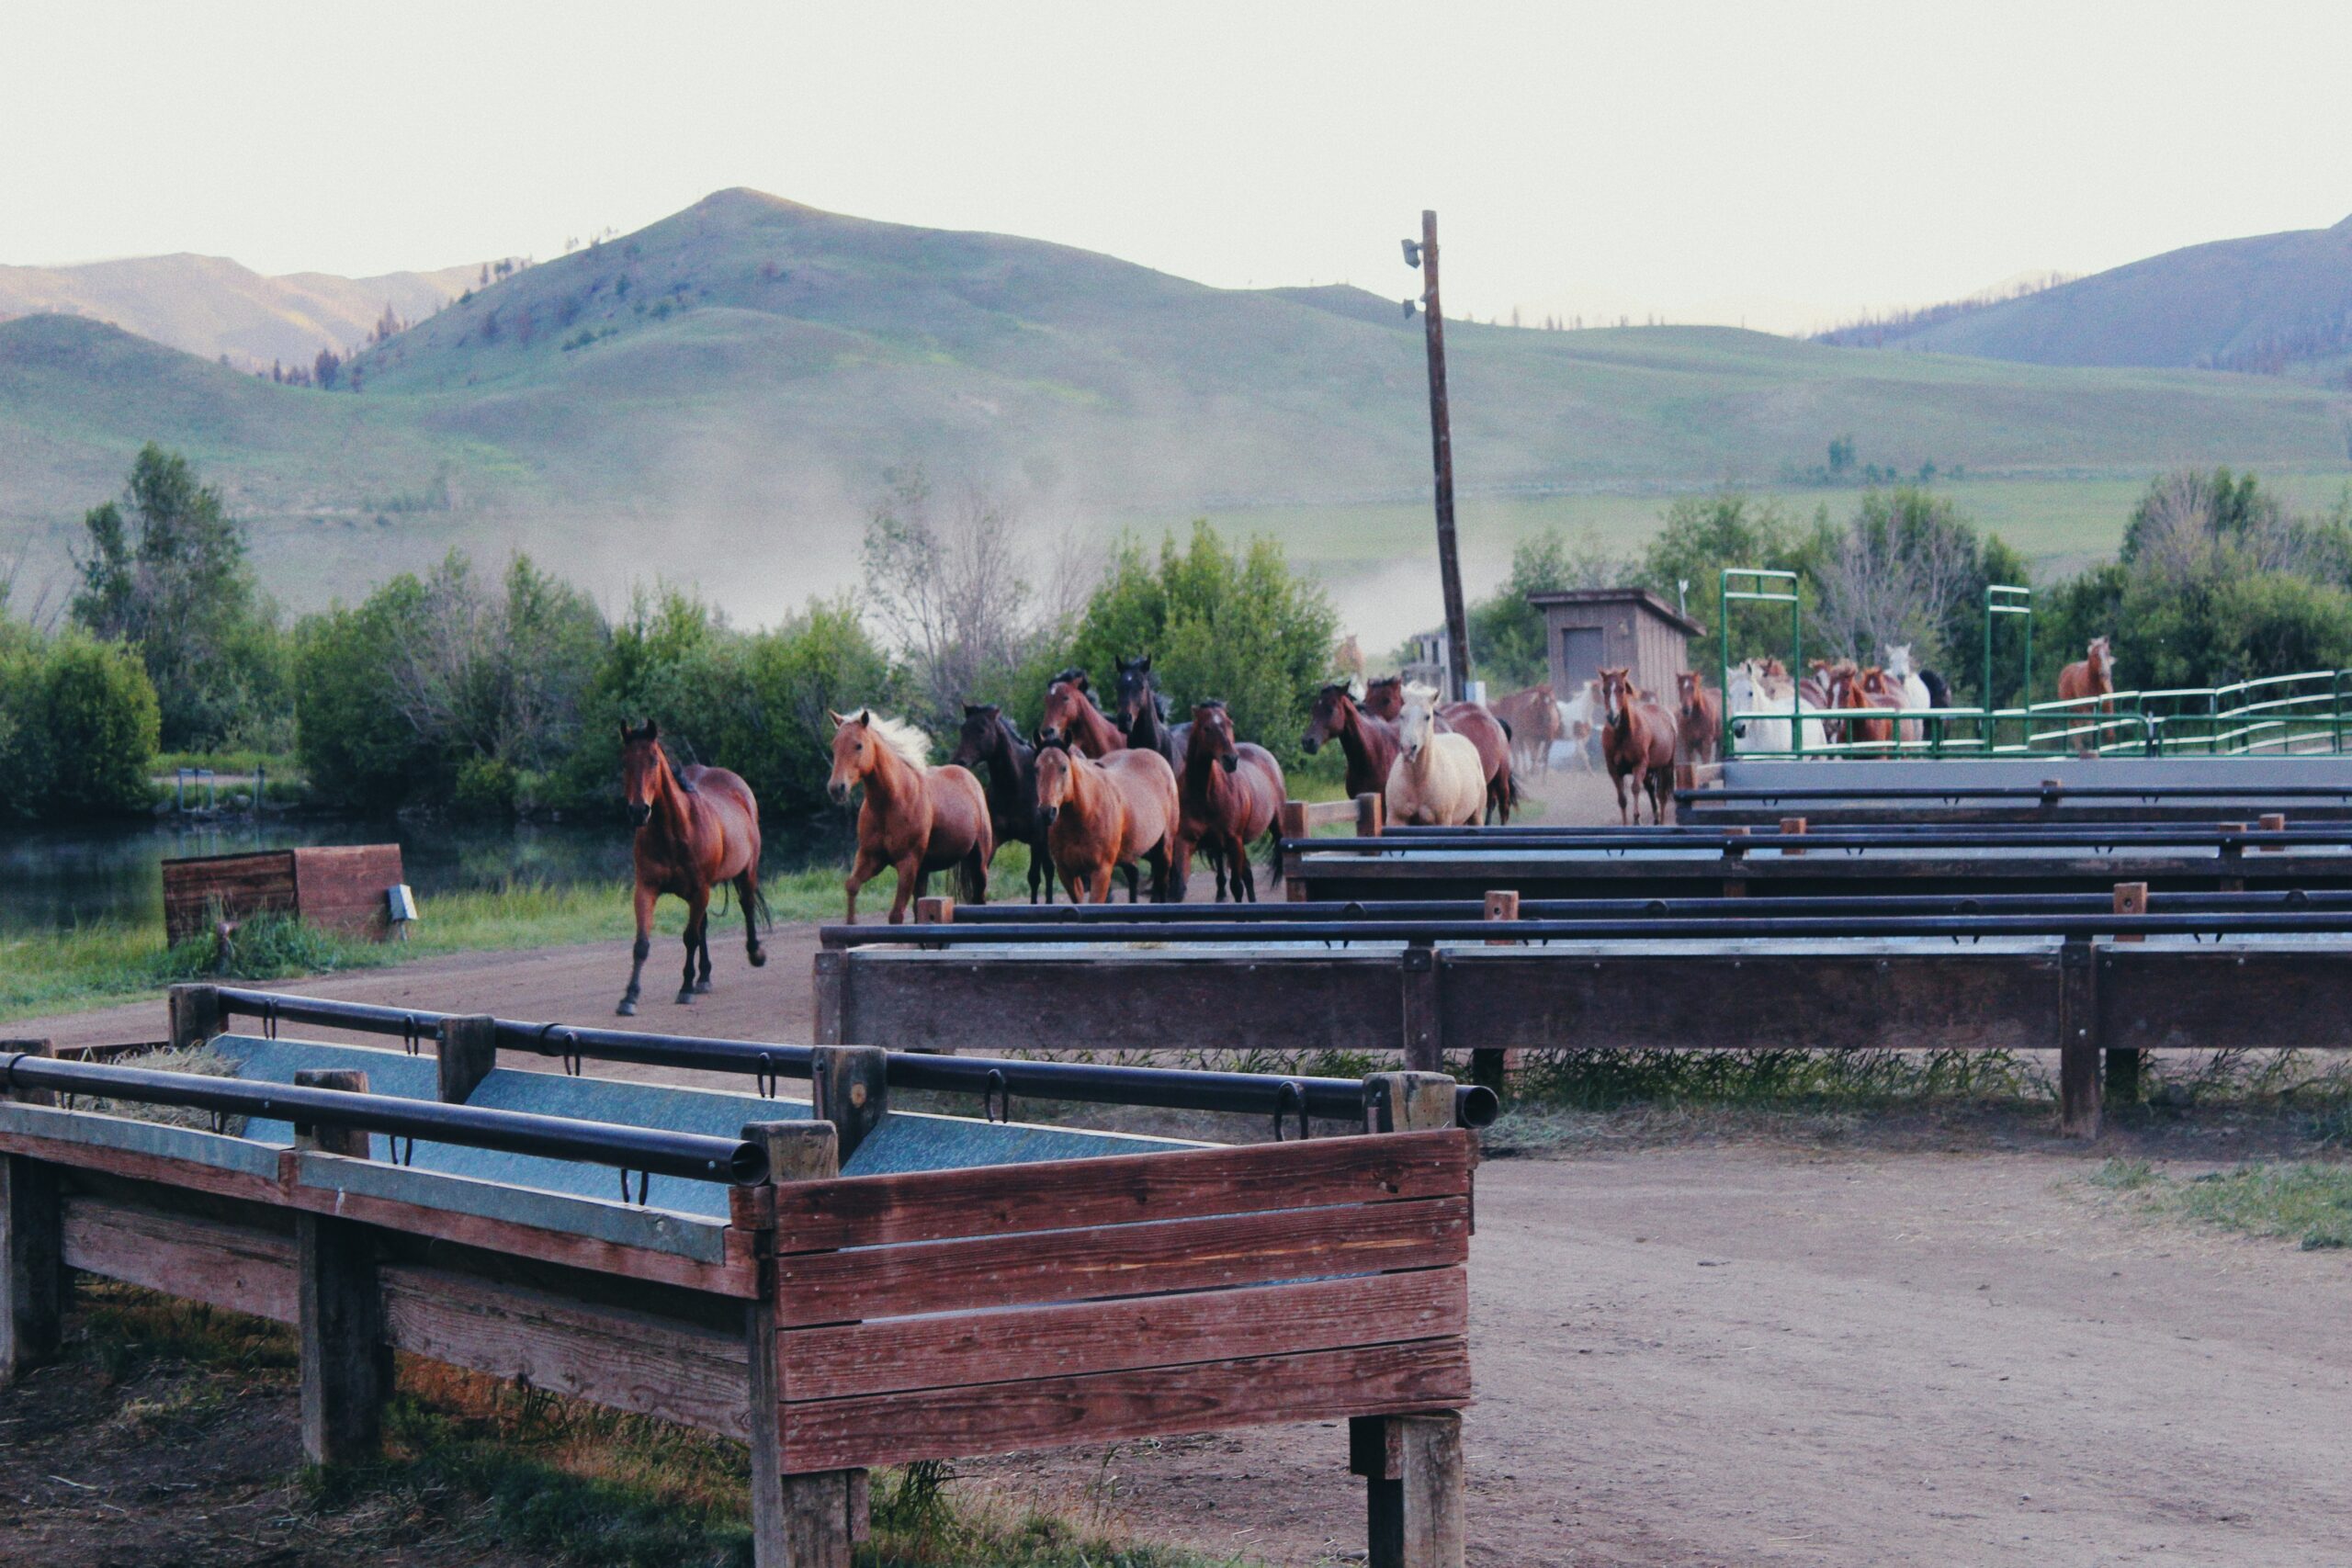 A group of horses running towards a group of troughs, with mountains in the background.